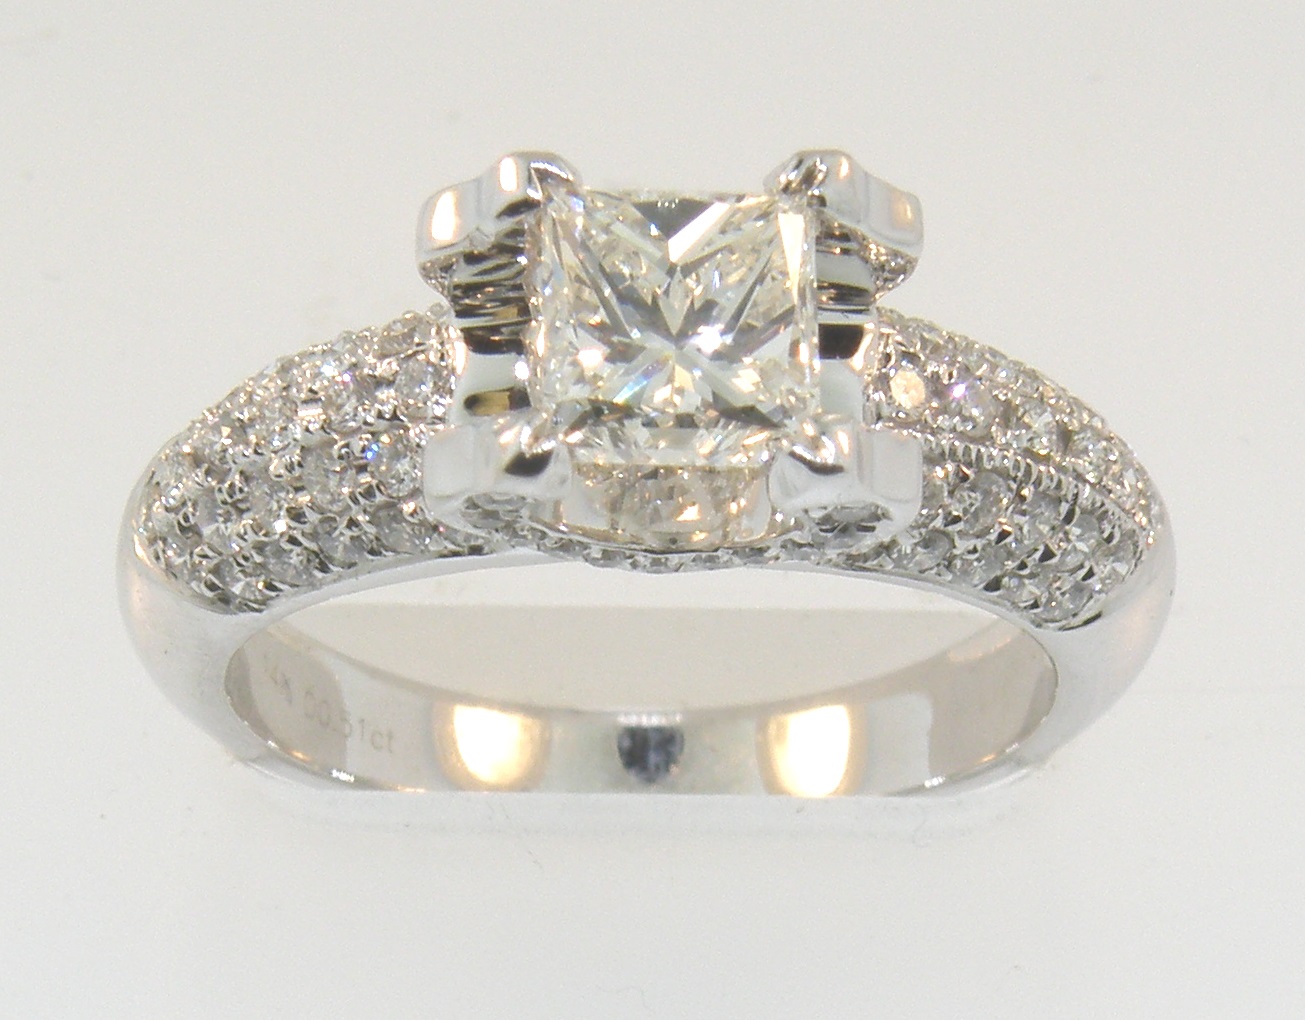 1.52 CARATS TOTAL WEIGHT DIAMOND RING